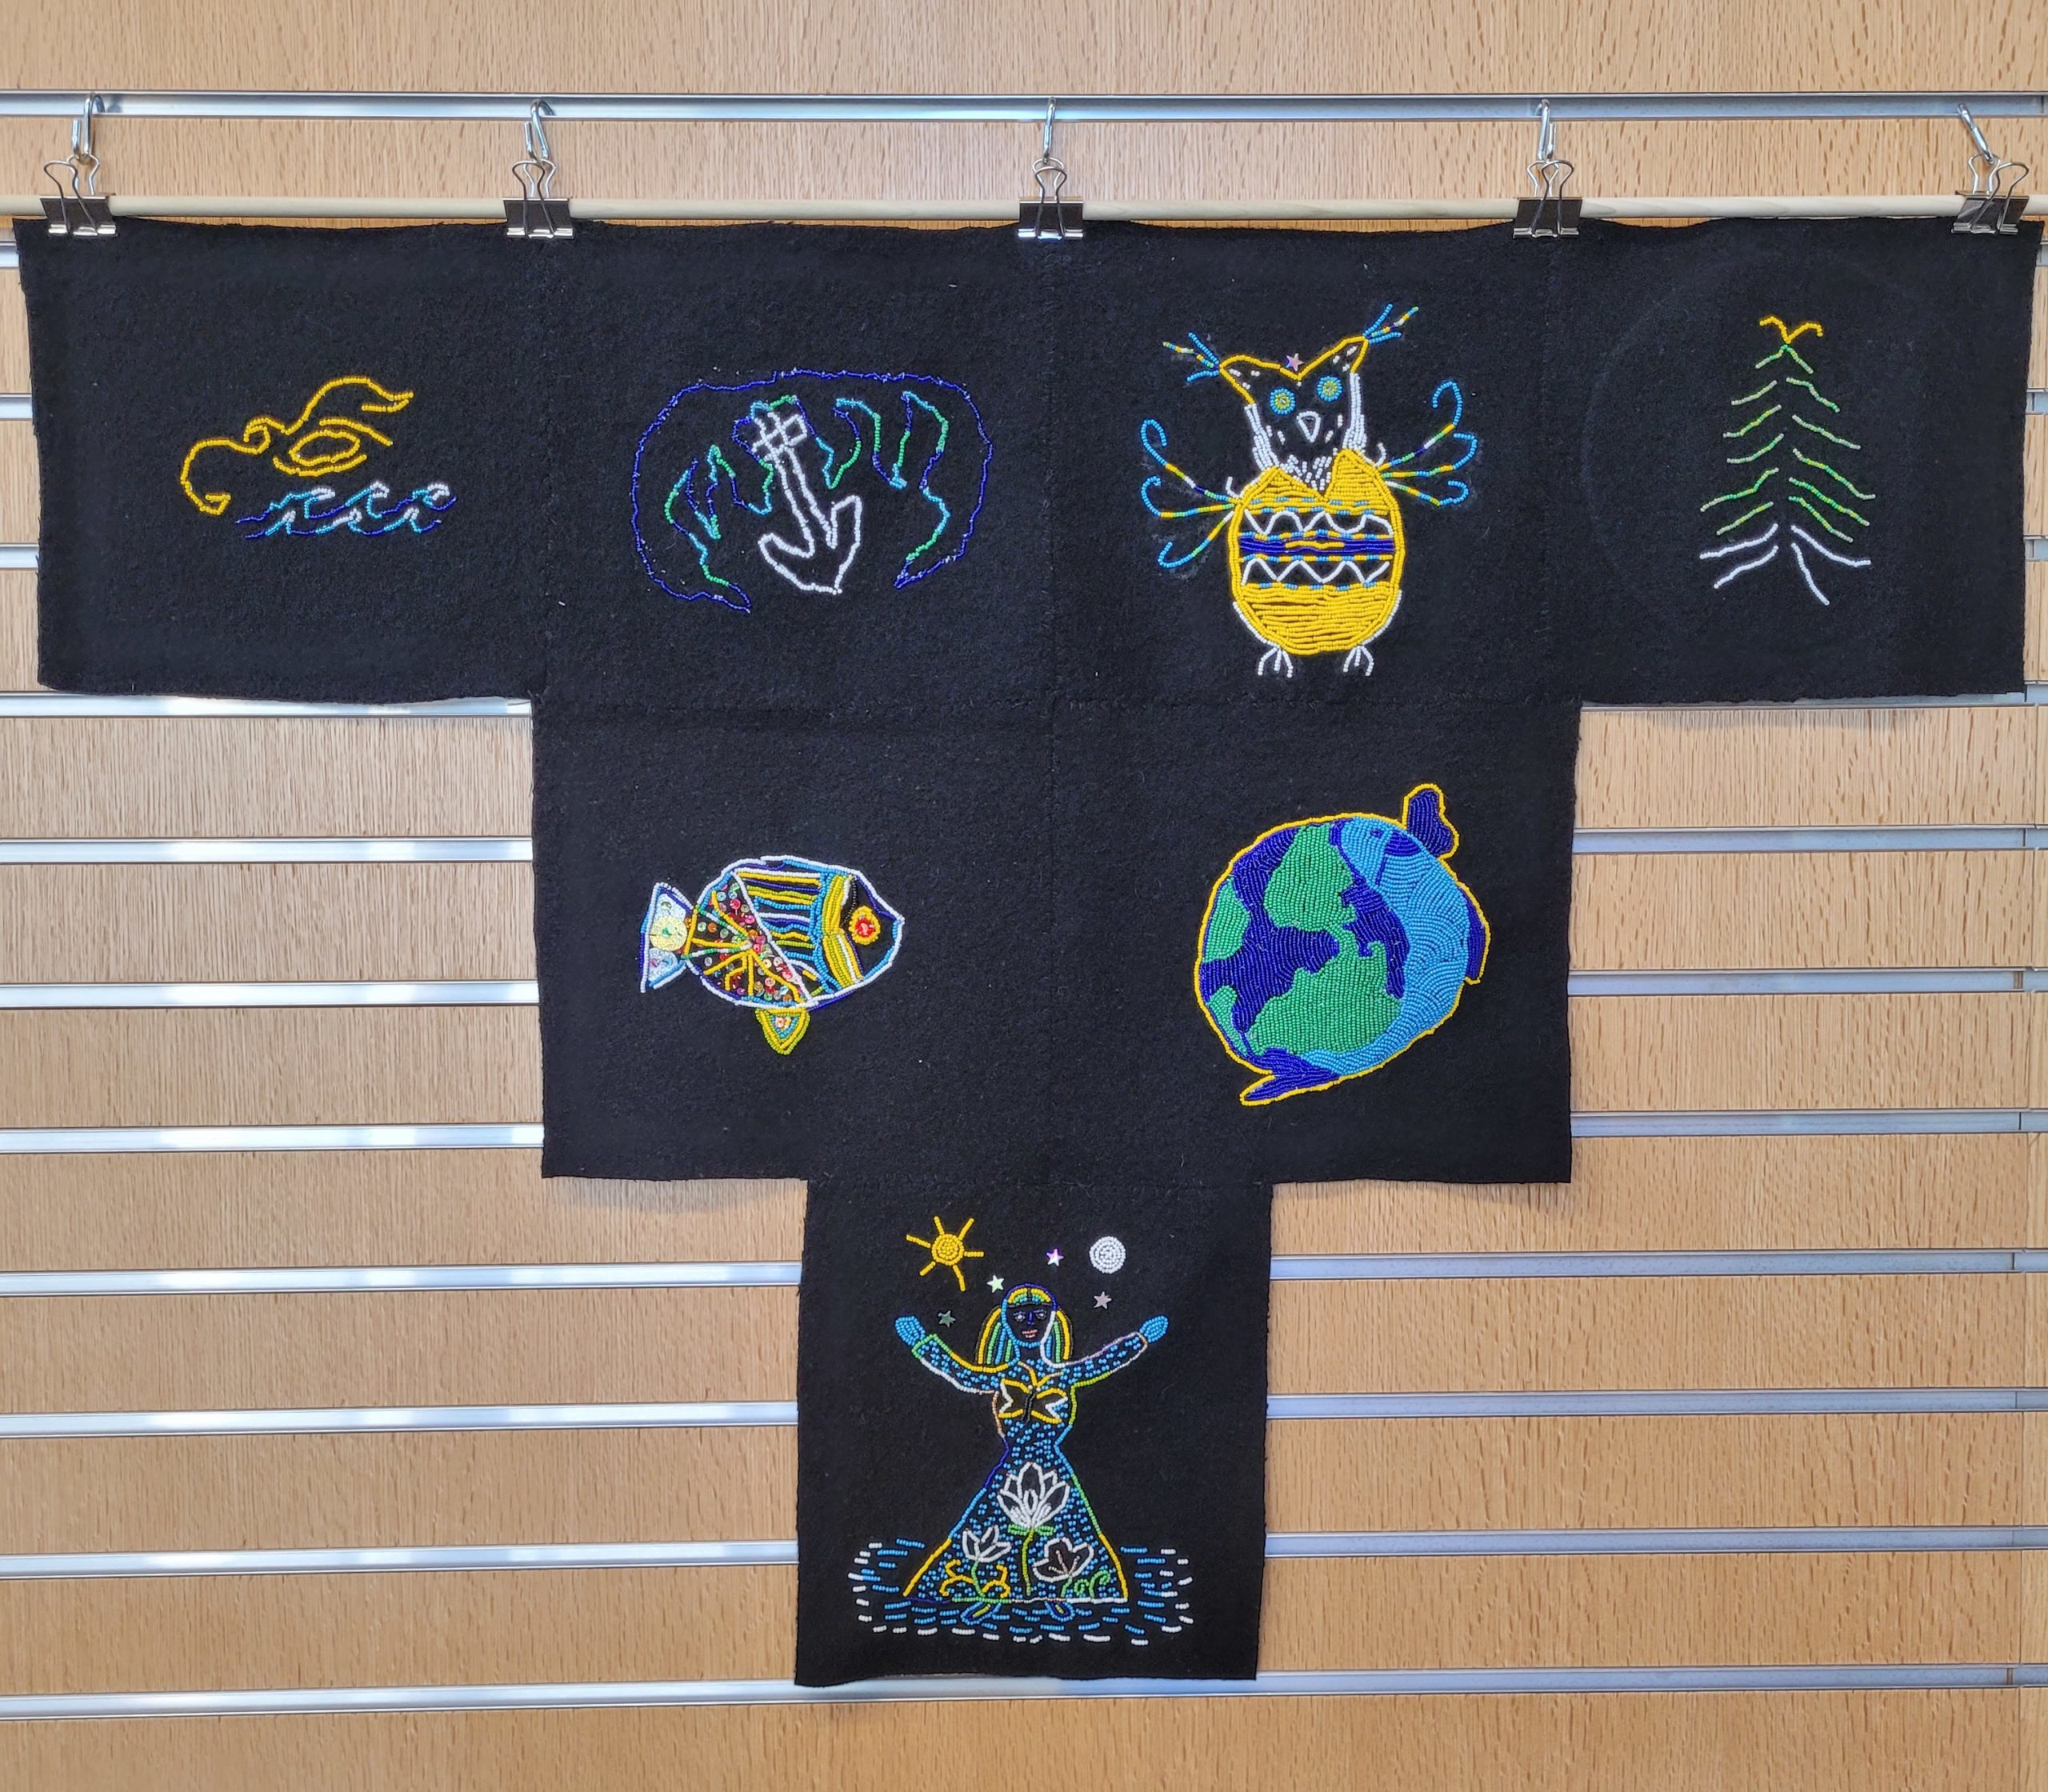 Photo of collective tapestry of beaded artworks at Albion Library.